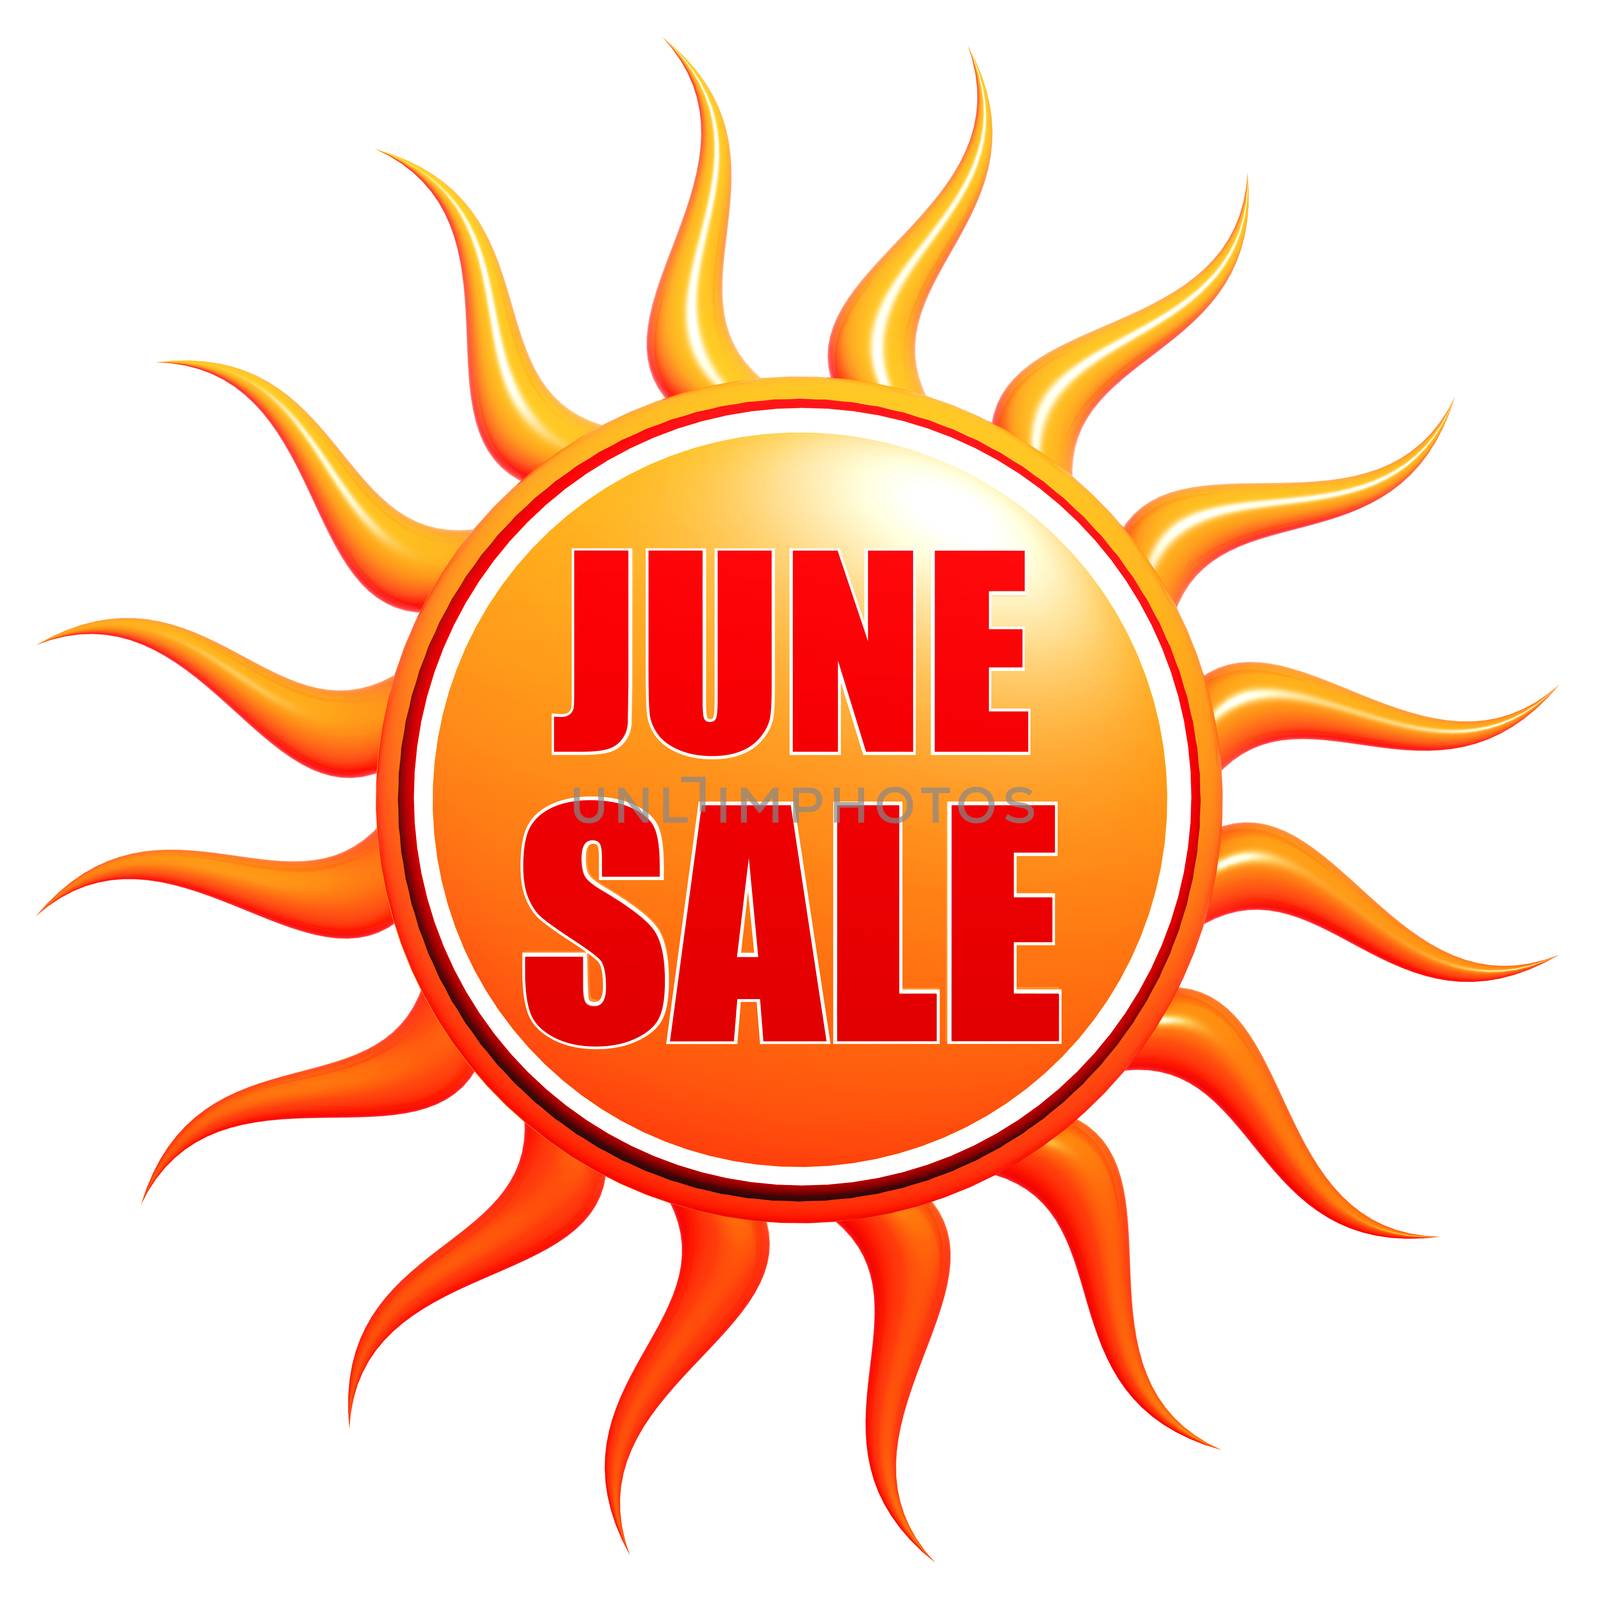 June sale banner - text in 3d red orange yellow label with sun shape, business concept